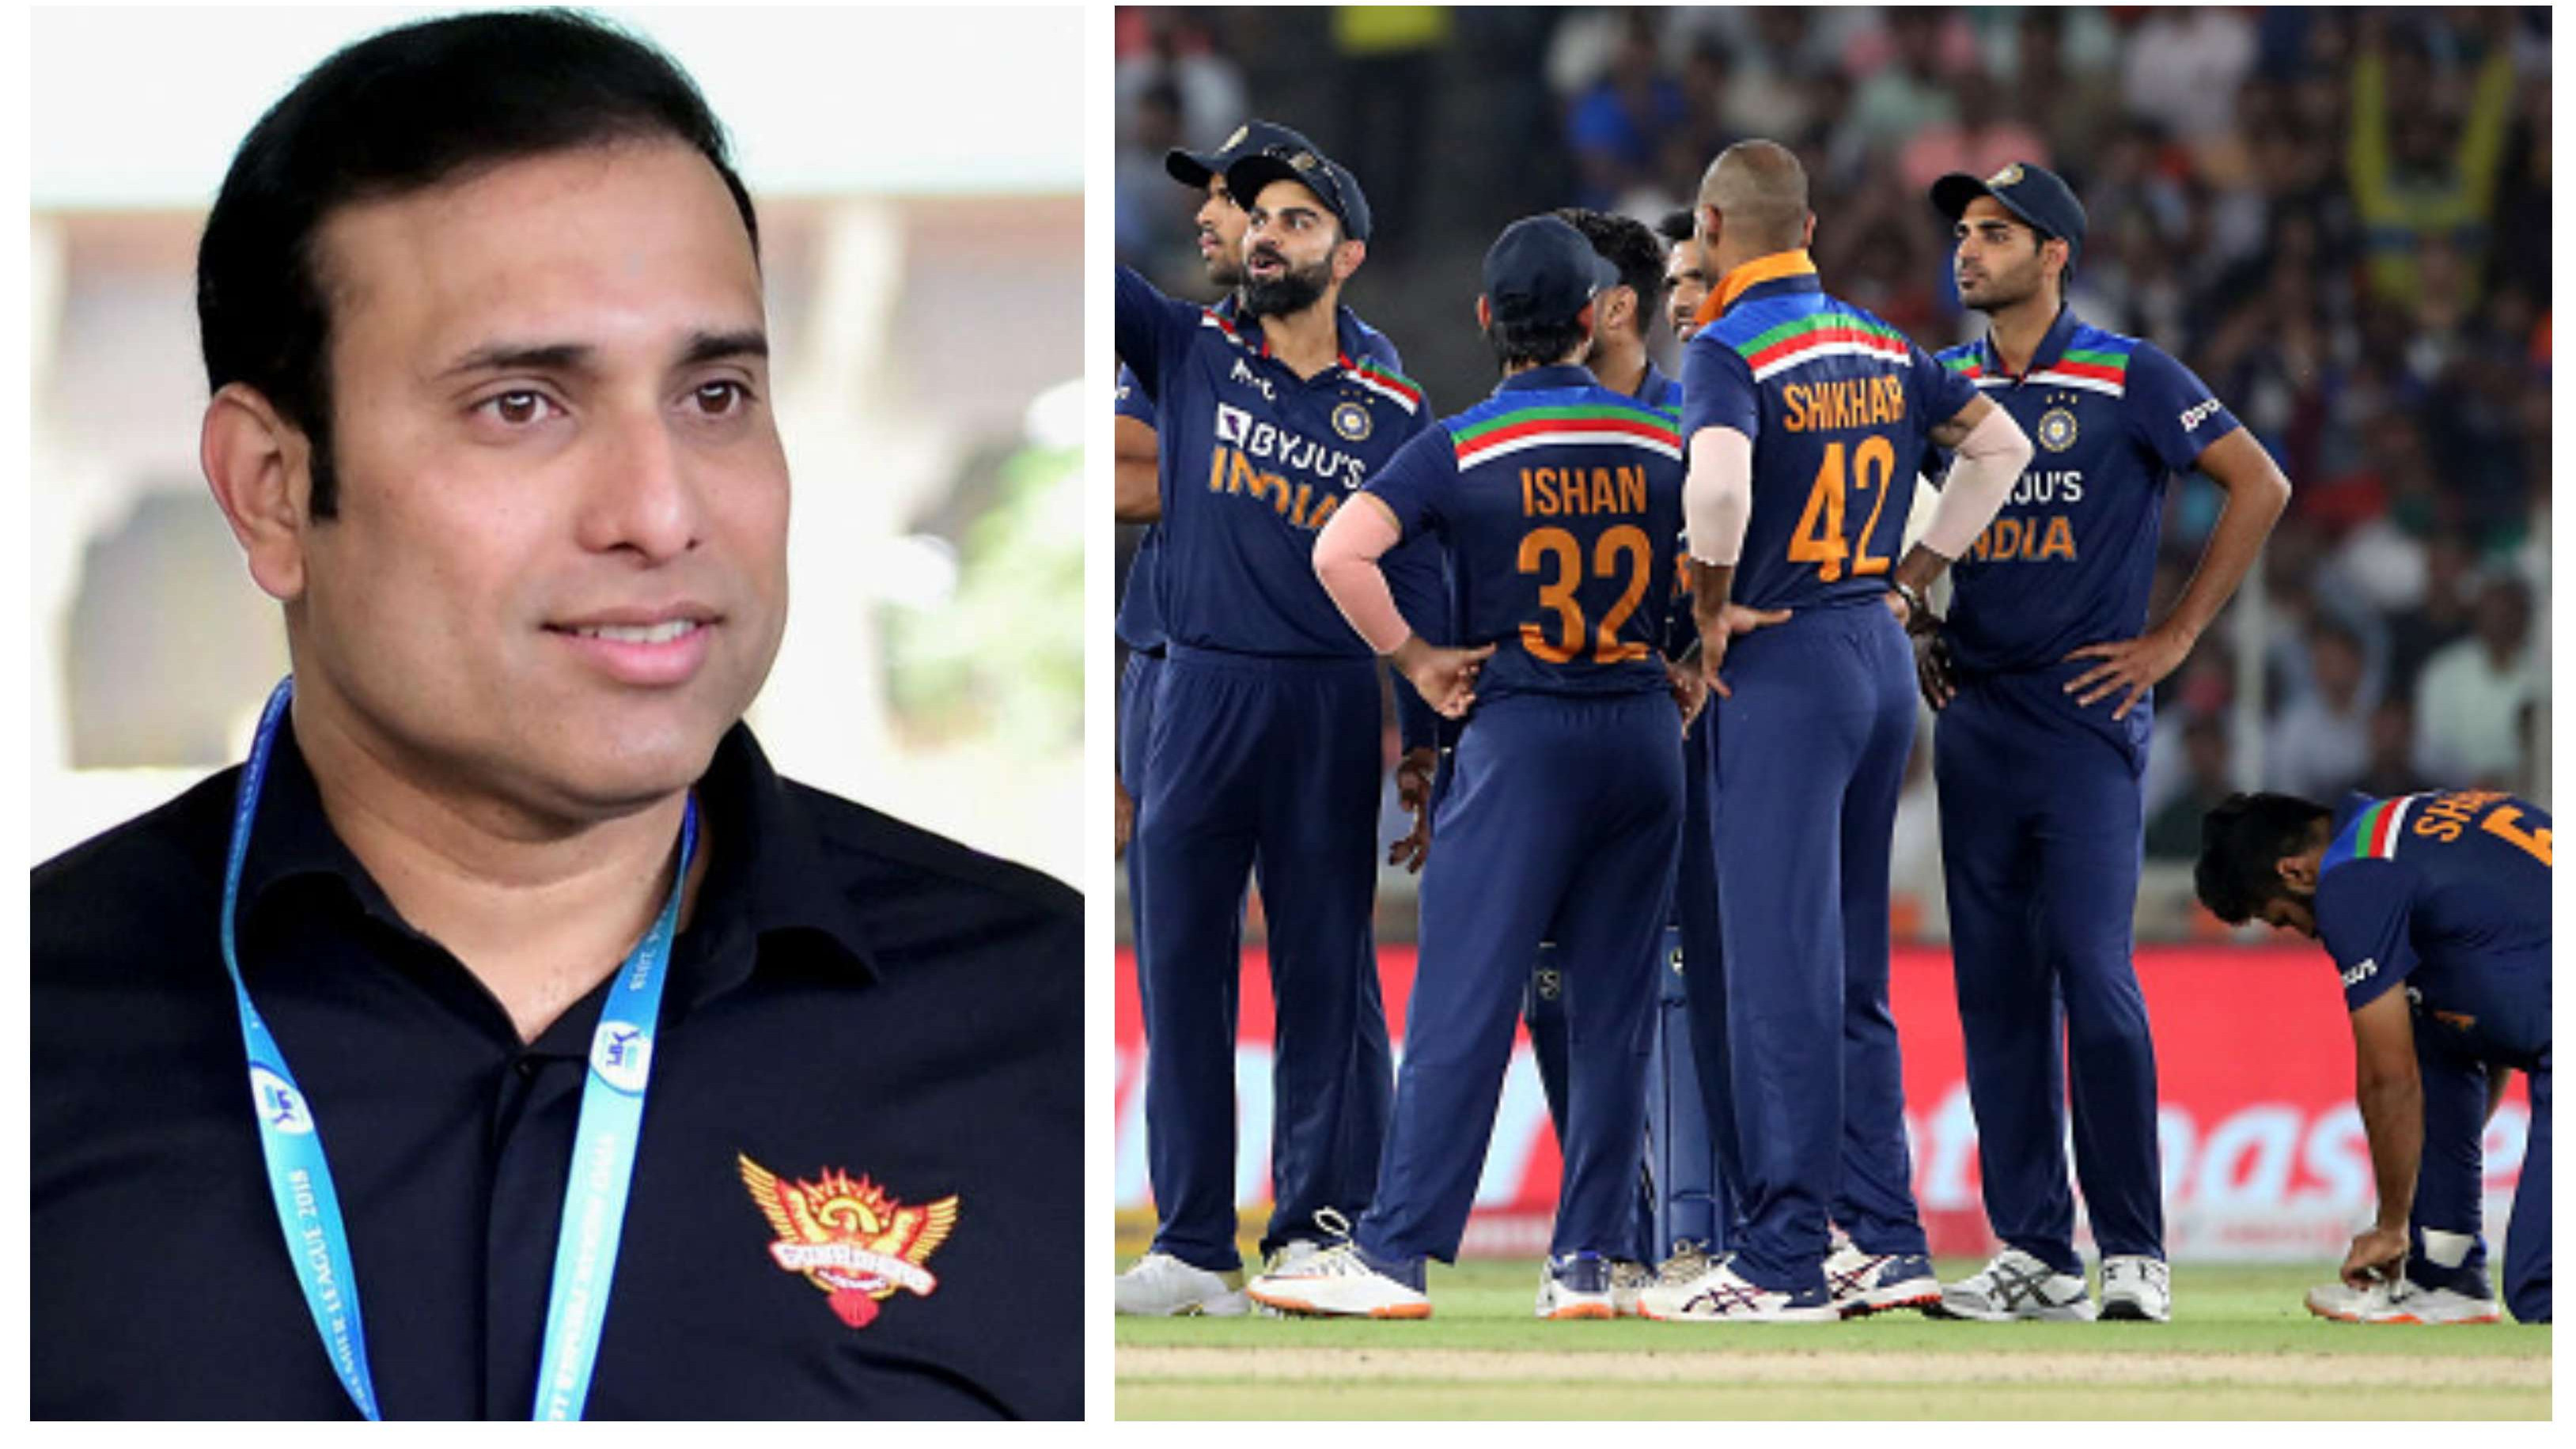 IND v ENG 2021: VVS Laxman attributes India’s success in 2nd T20I to “clinical bowling performance”